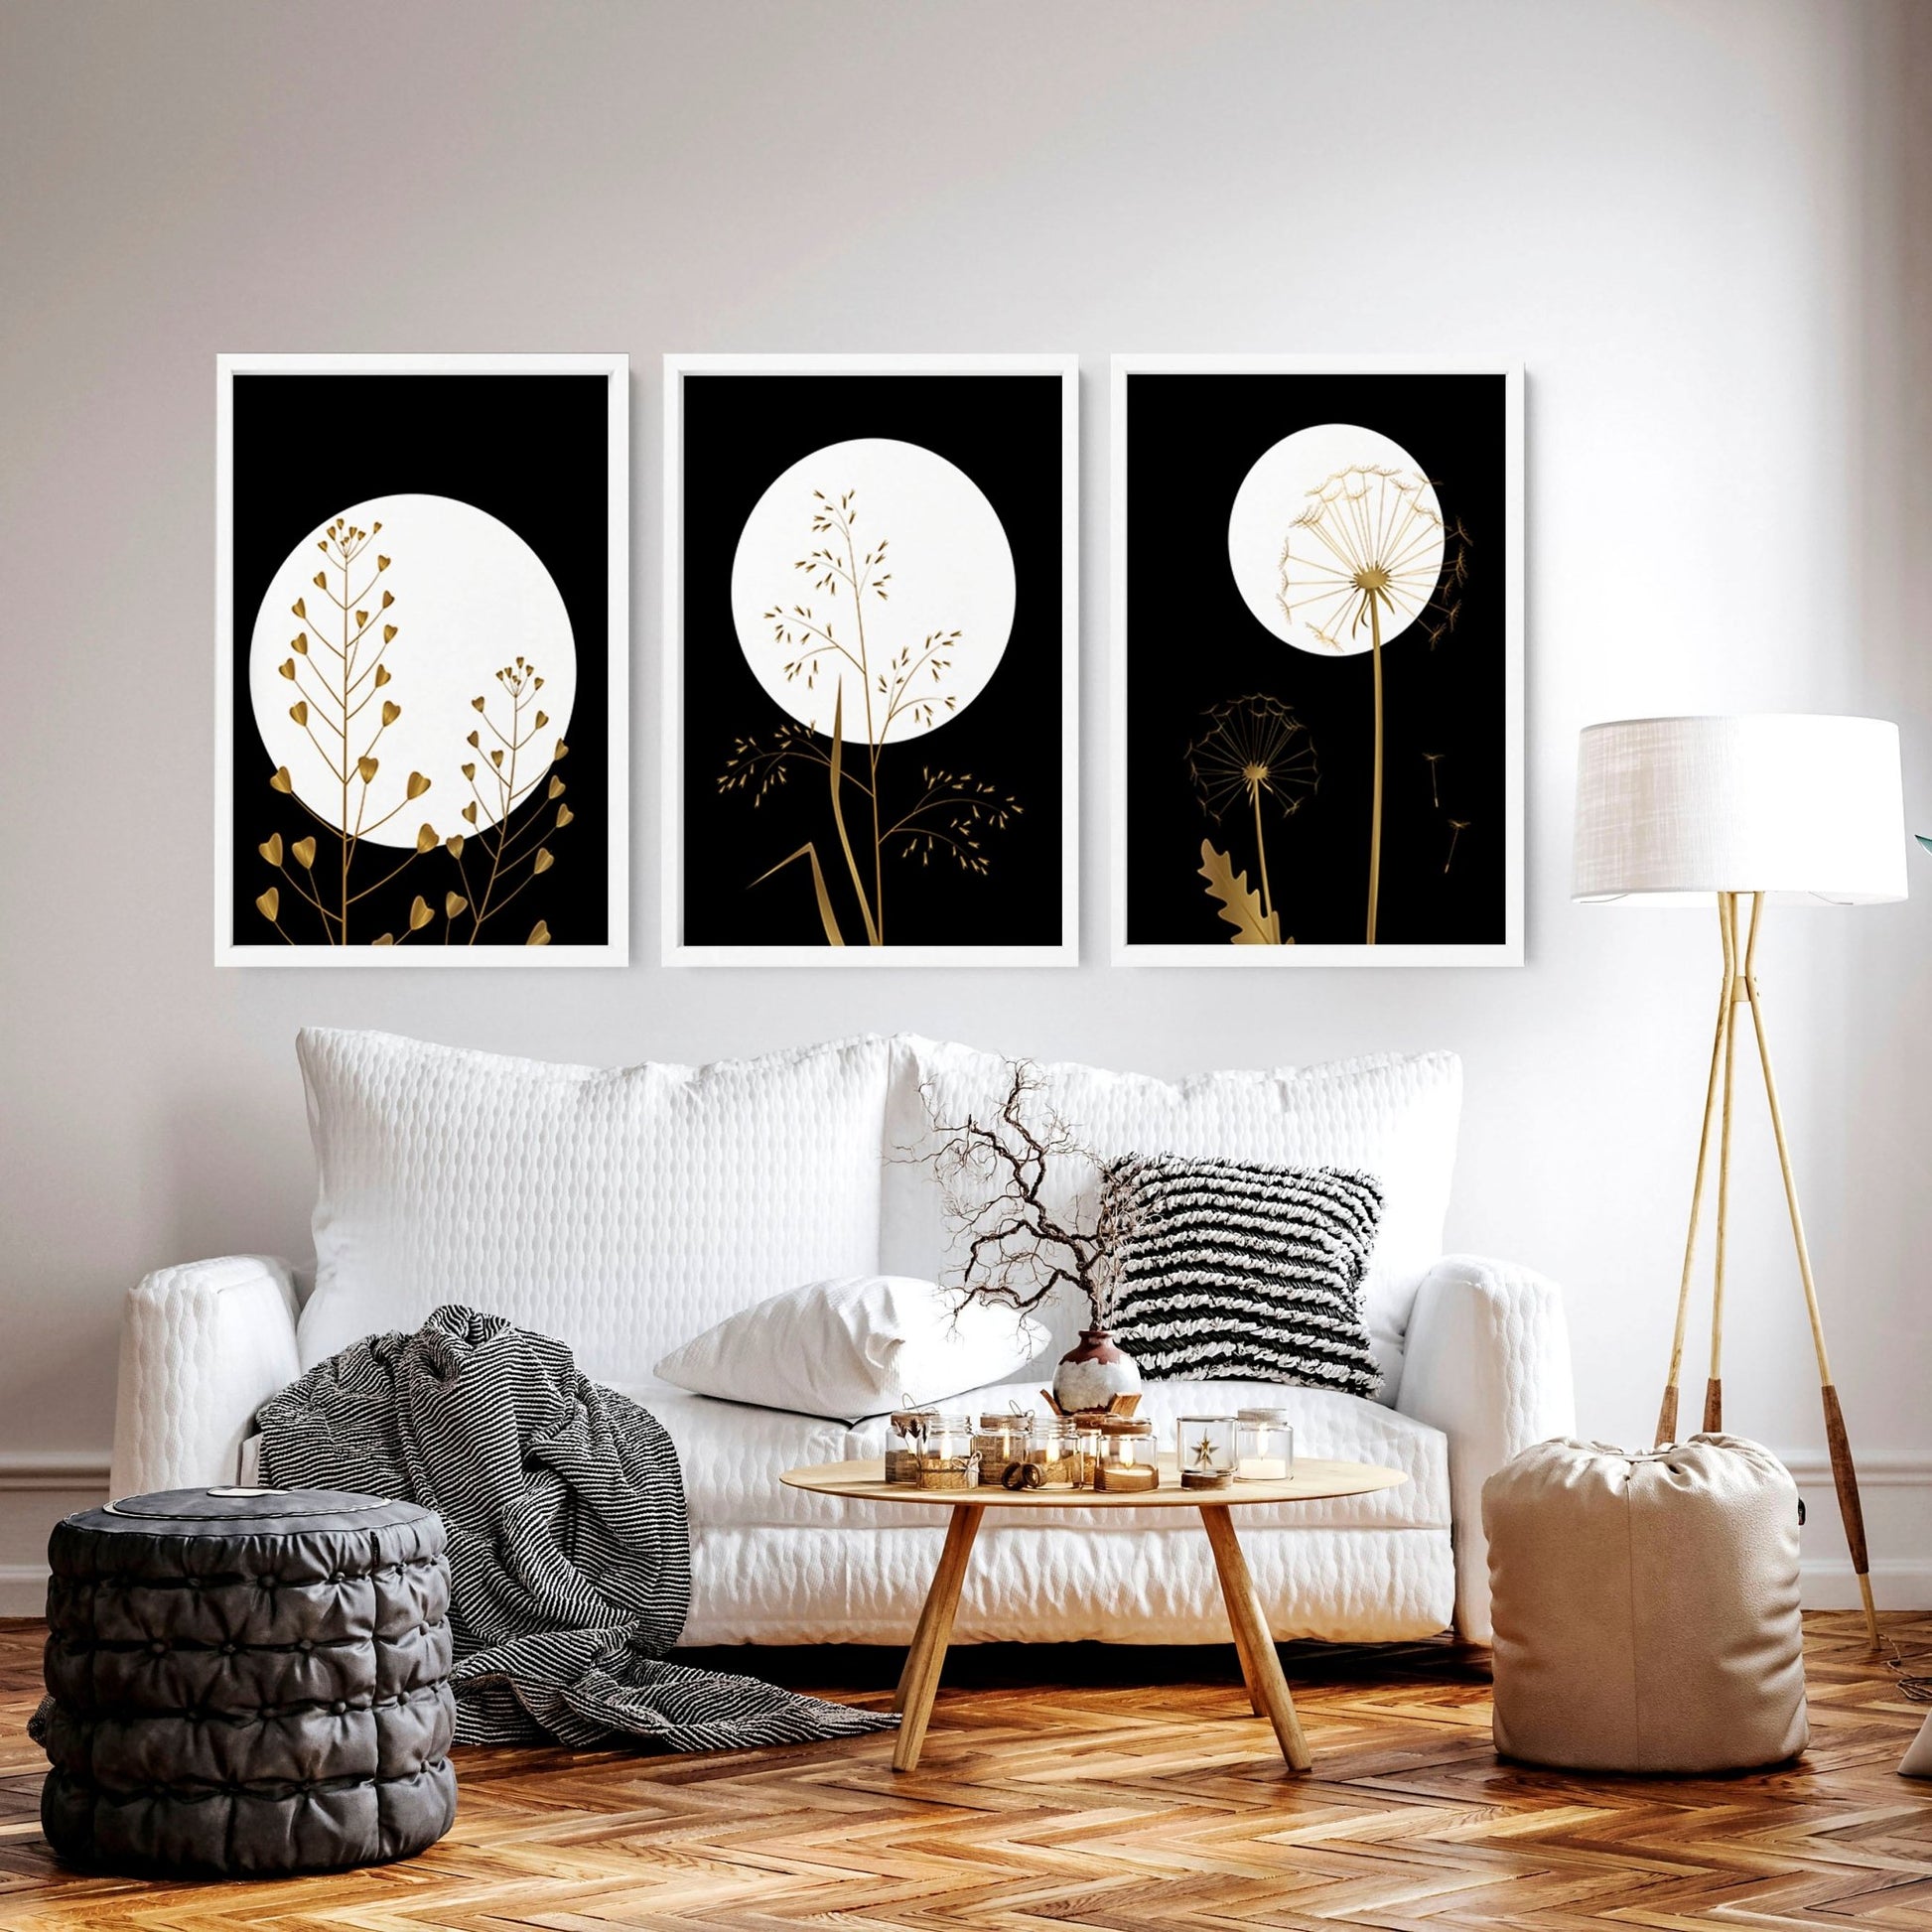 Black wall art for living room | set of 3 wall art prints - About Wall Art